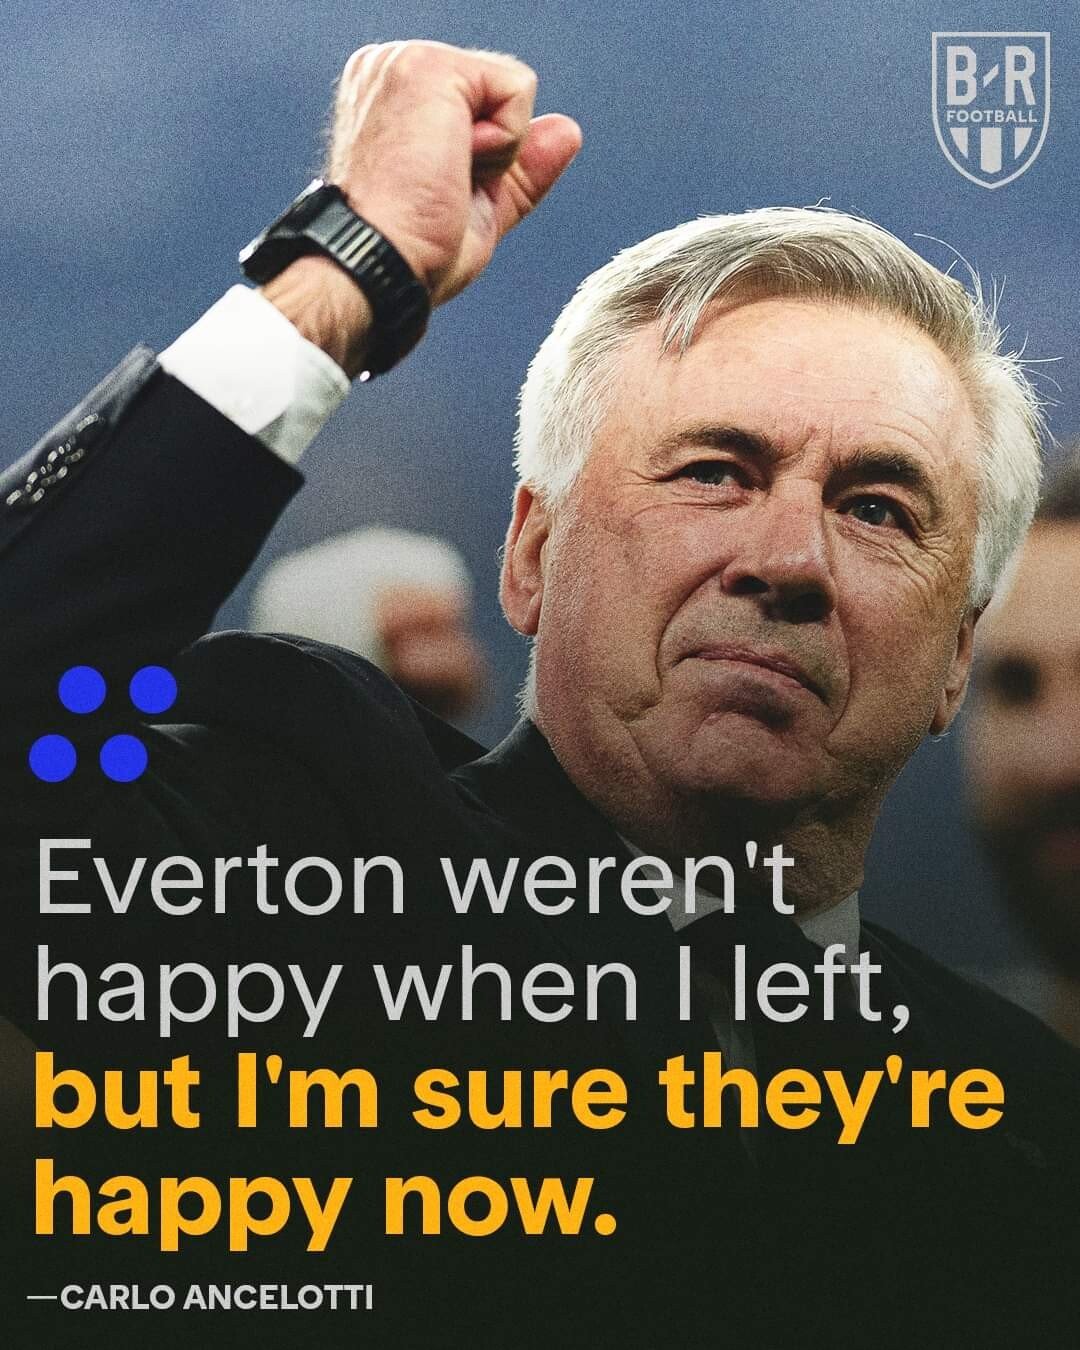 Everton's absurd remarks during the gap between father and sonLOL